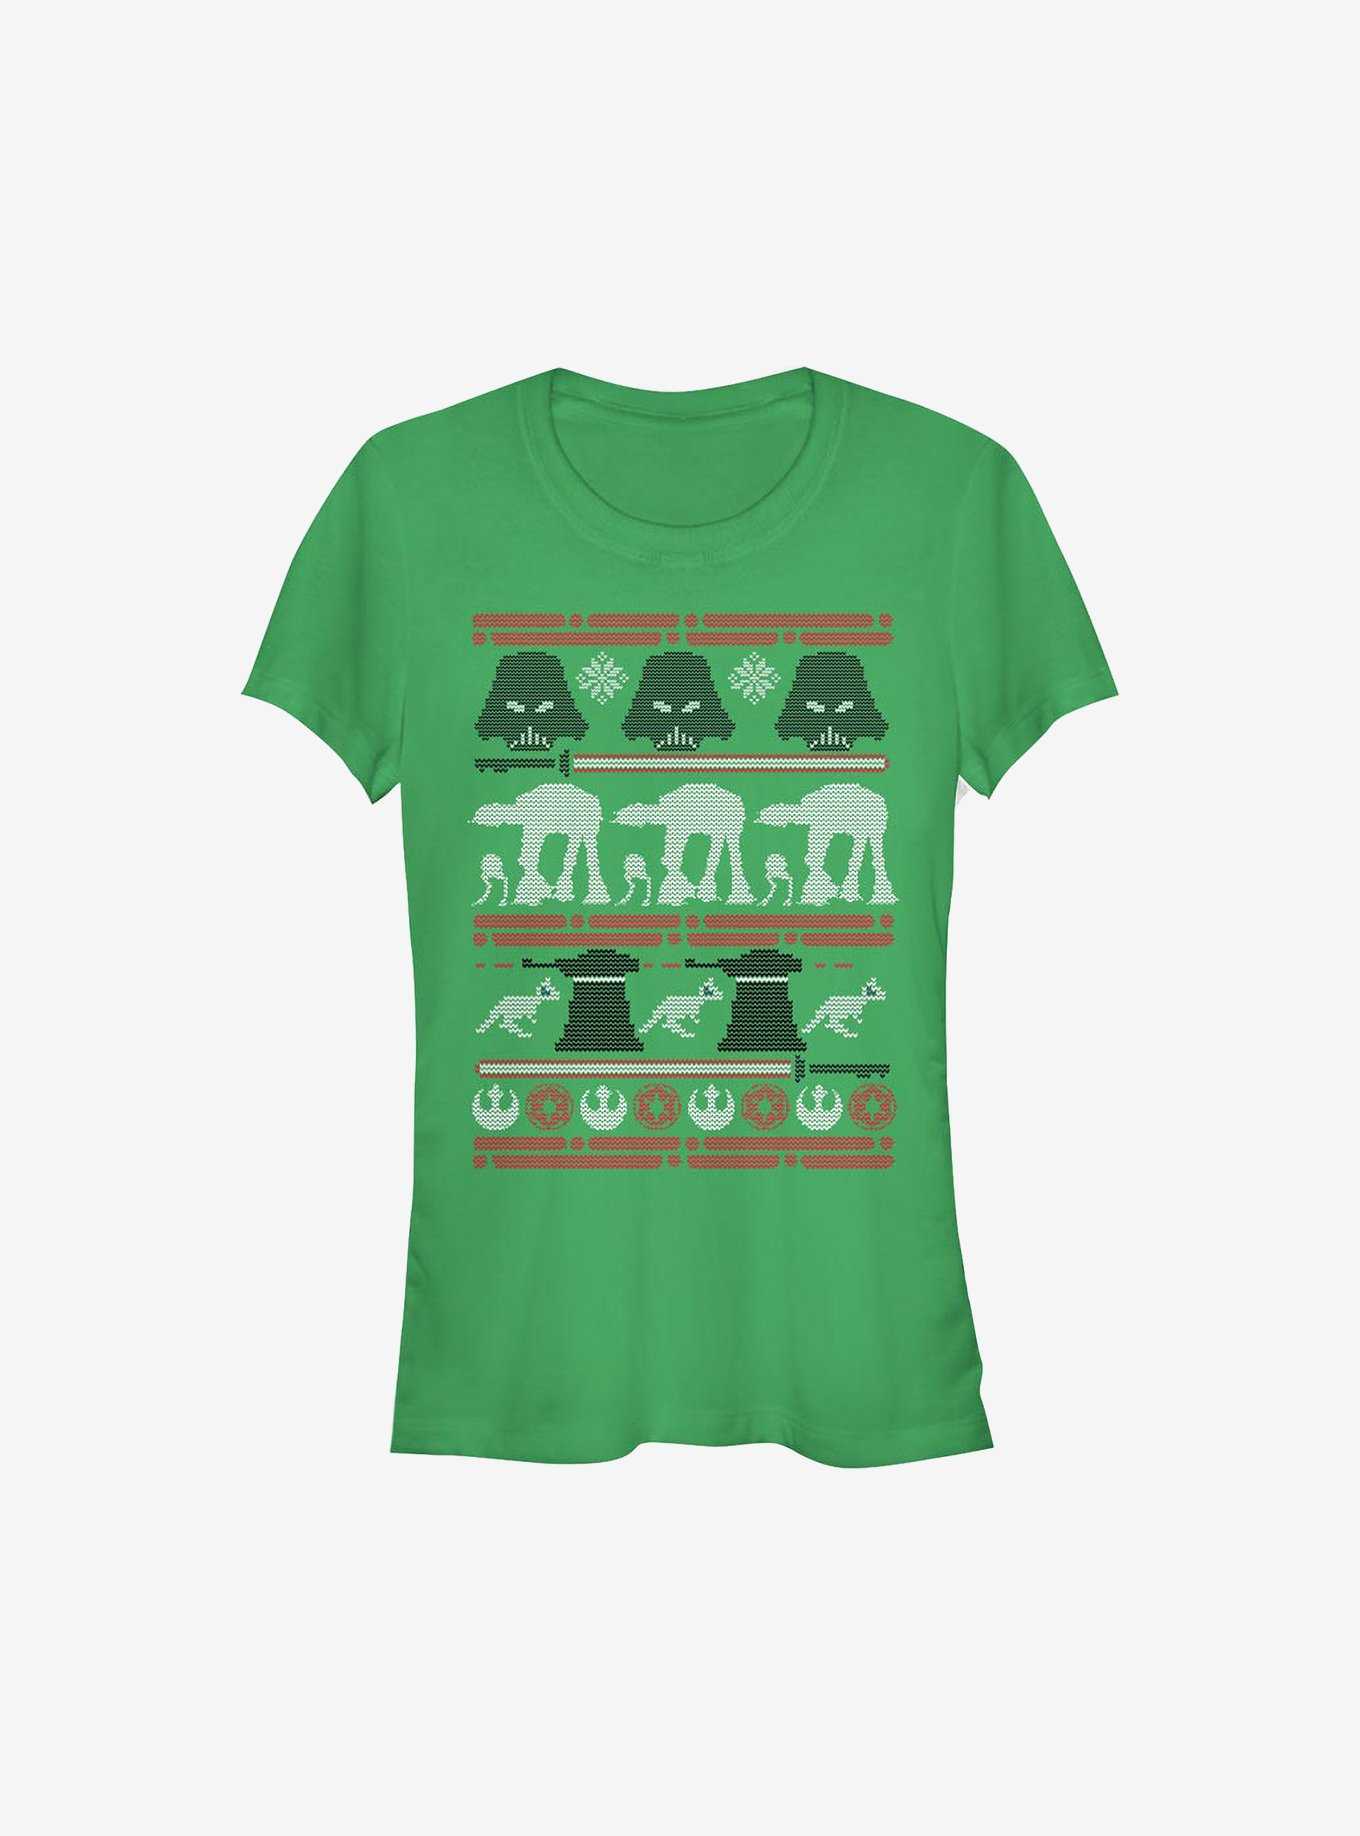 Star Wars Hoth Battle Ugly Christmas Sweater Girls T-Shirt, , hi-res